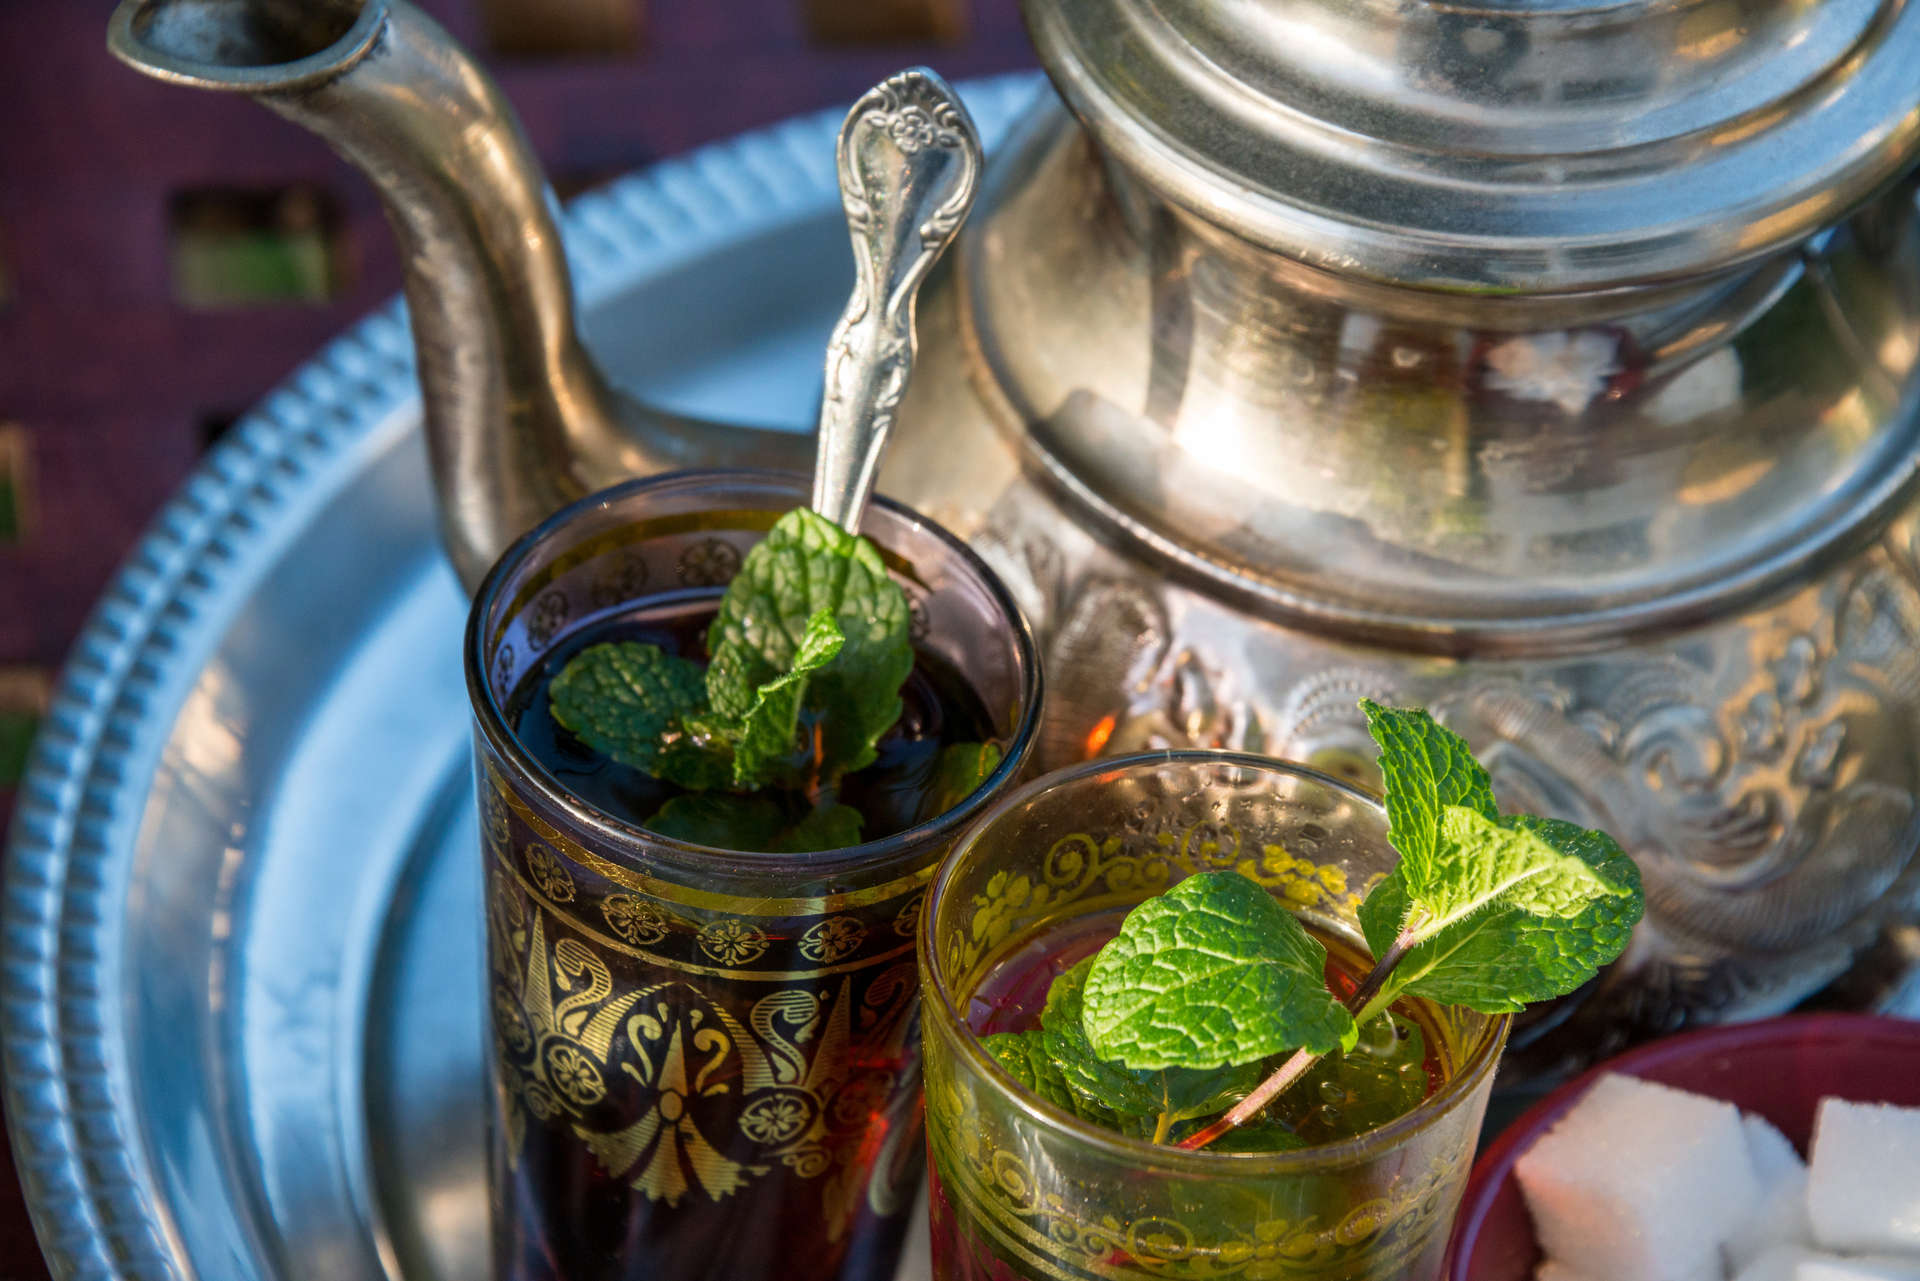 Traditional Moroccan mint tea in a traditional cup with mint leaves